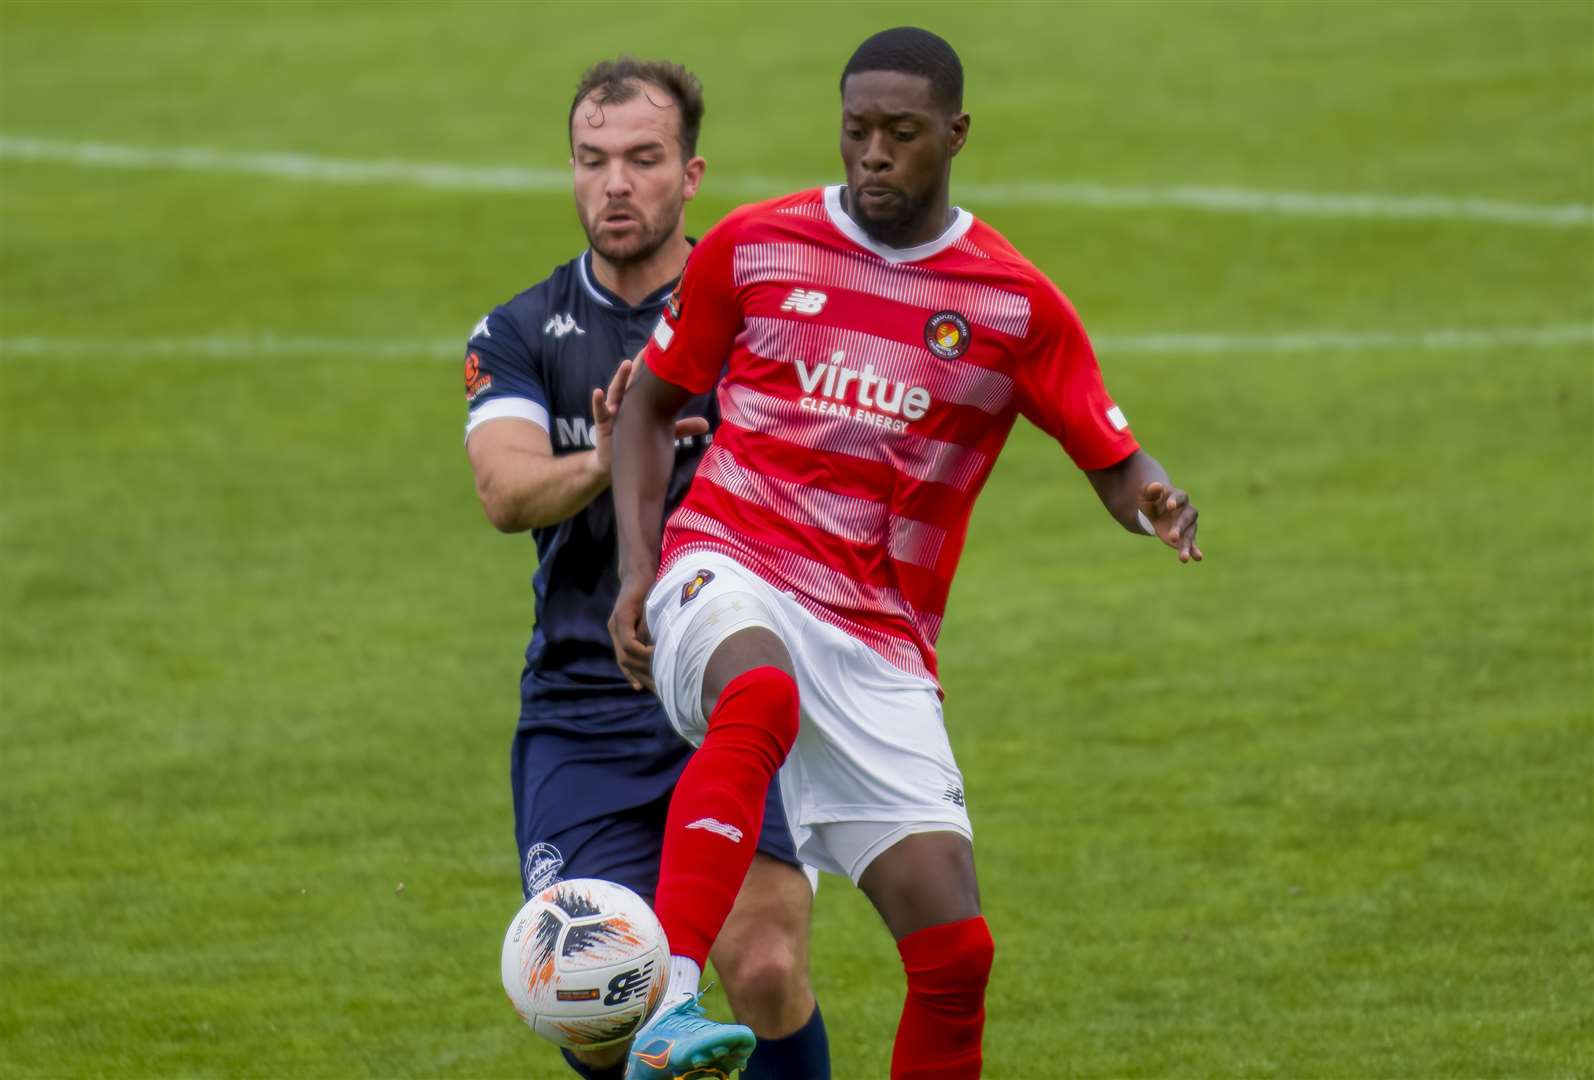 Dover player-assistant Mitch Brundle up against Ebbsfleet forward Rakish Bingham earlier in the season. The teams will meet this weekend at Crabble. Picture: Ed Miller/EUFC